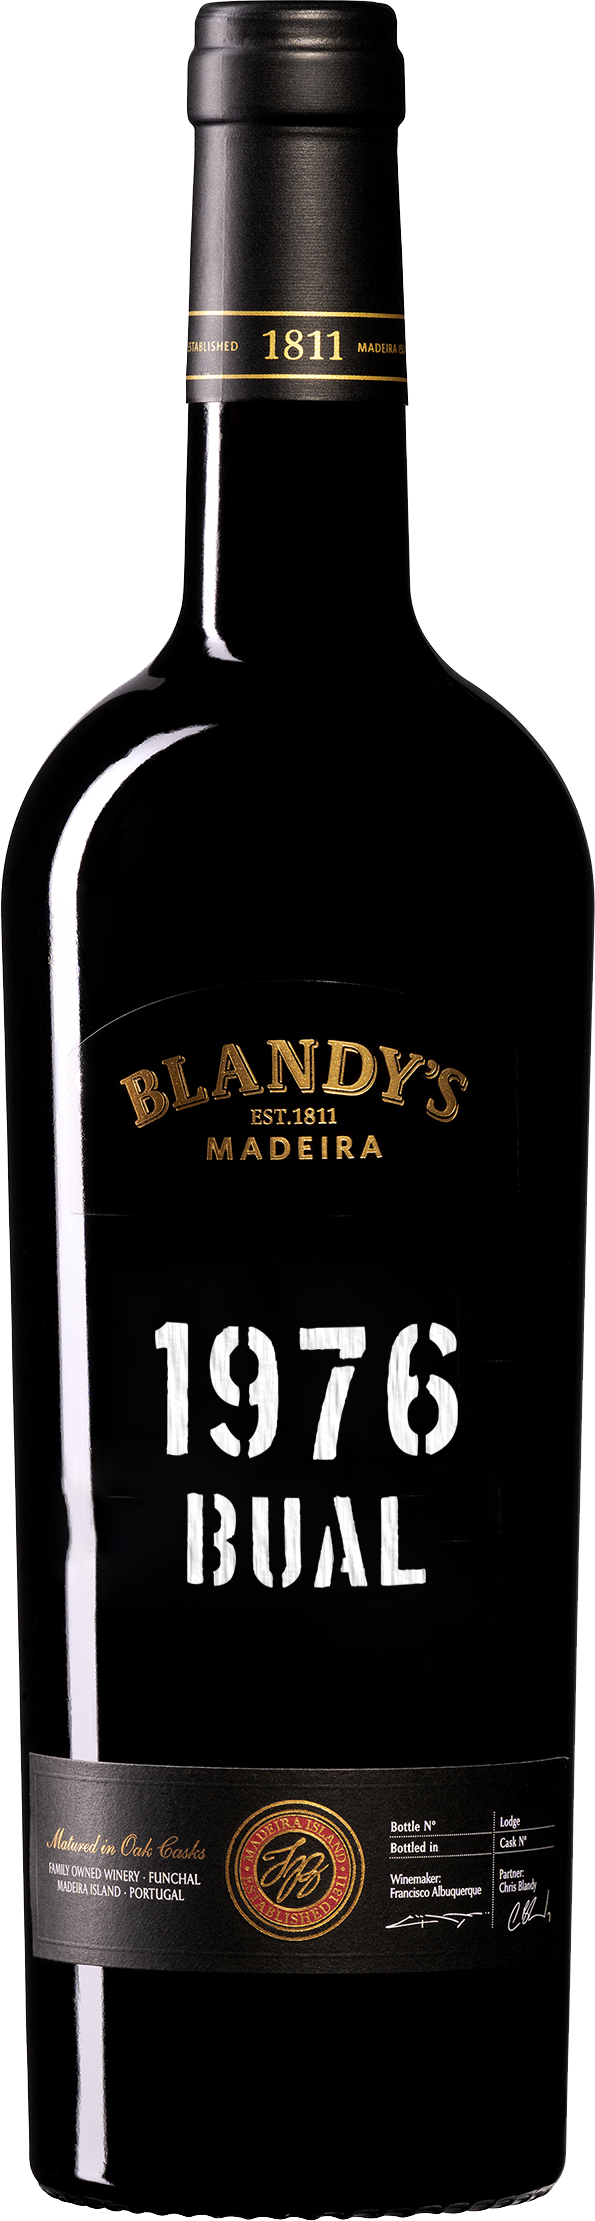 Product Image for BLANDY'S VINTAGE BUAL 1976 